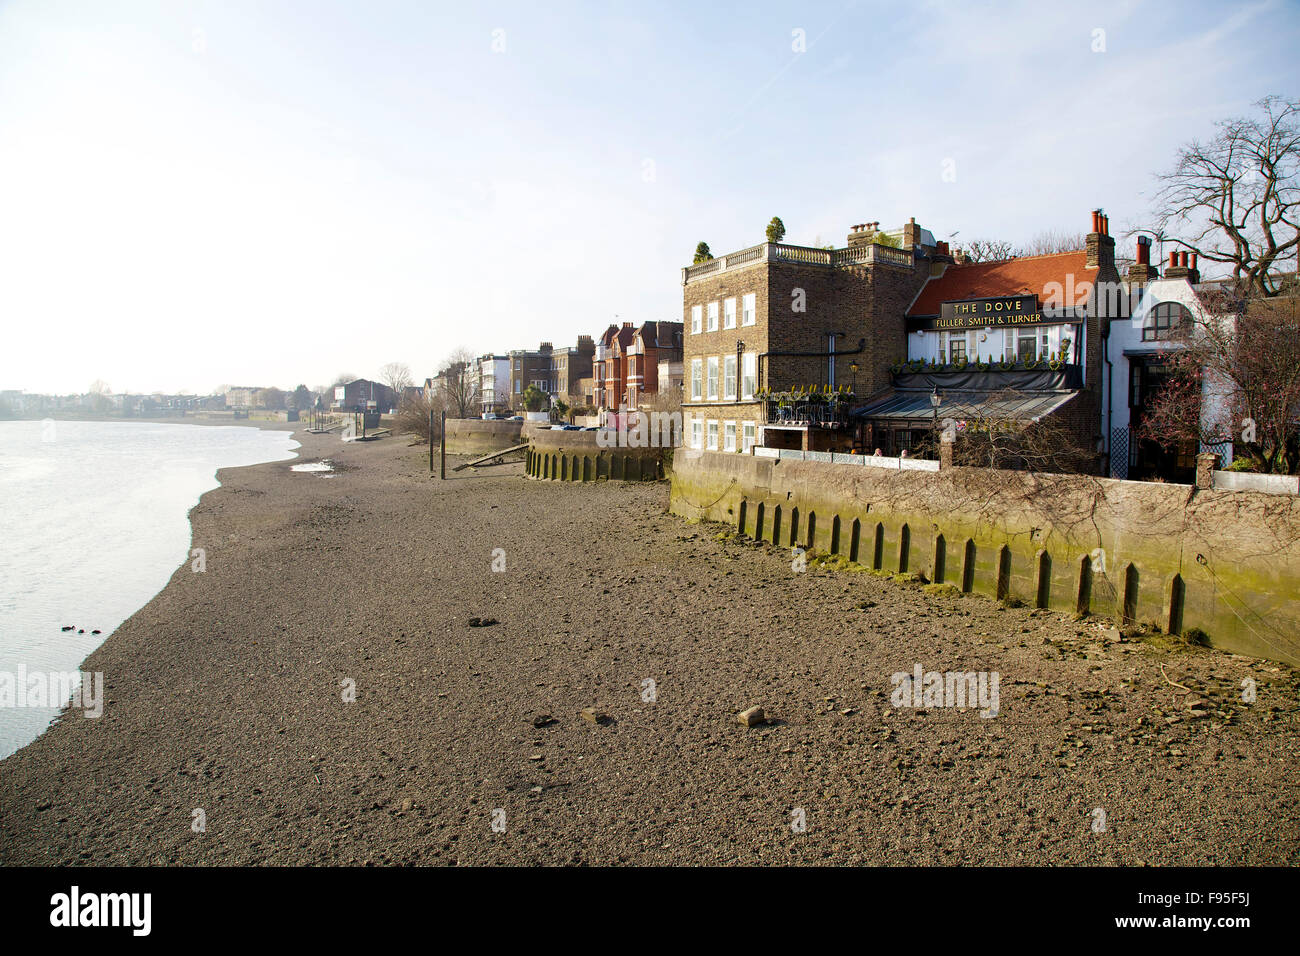 Hammersmith, London. View of a sandy beach along the River Thames. Traditional houses in view. Stock Photo